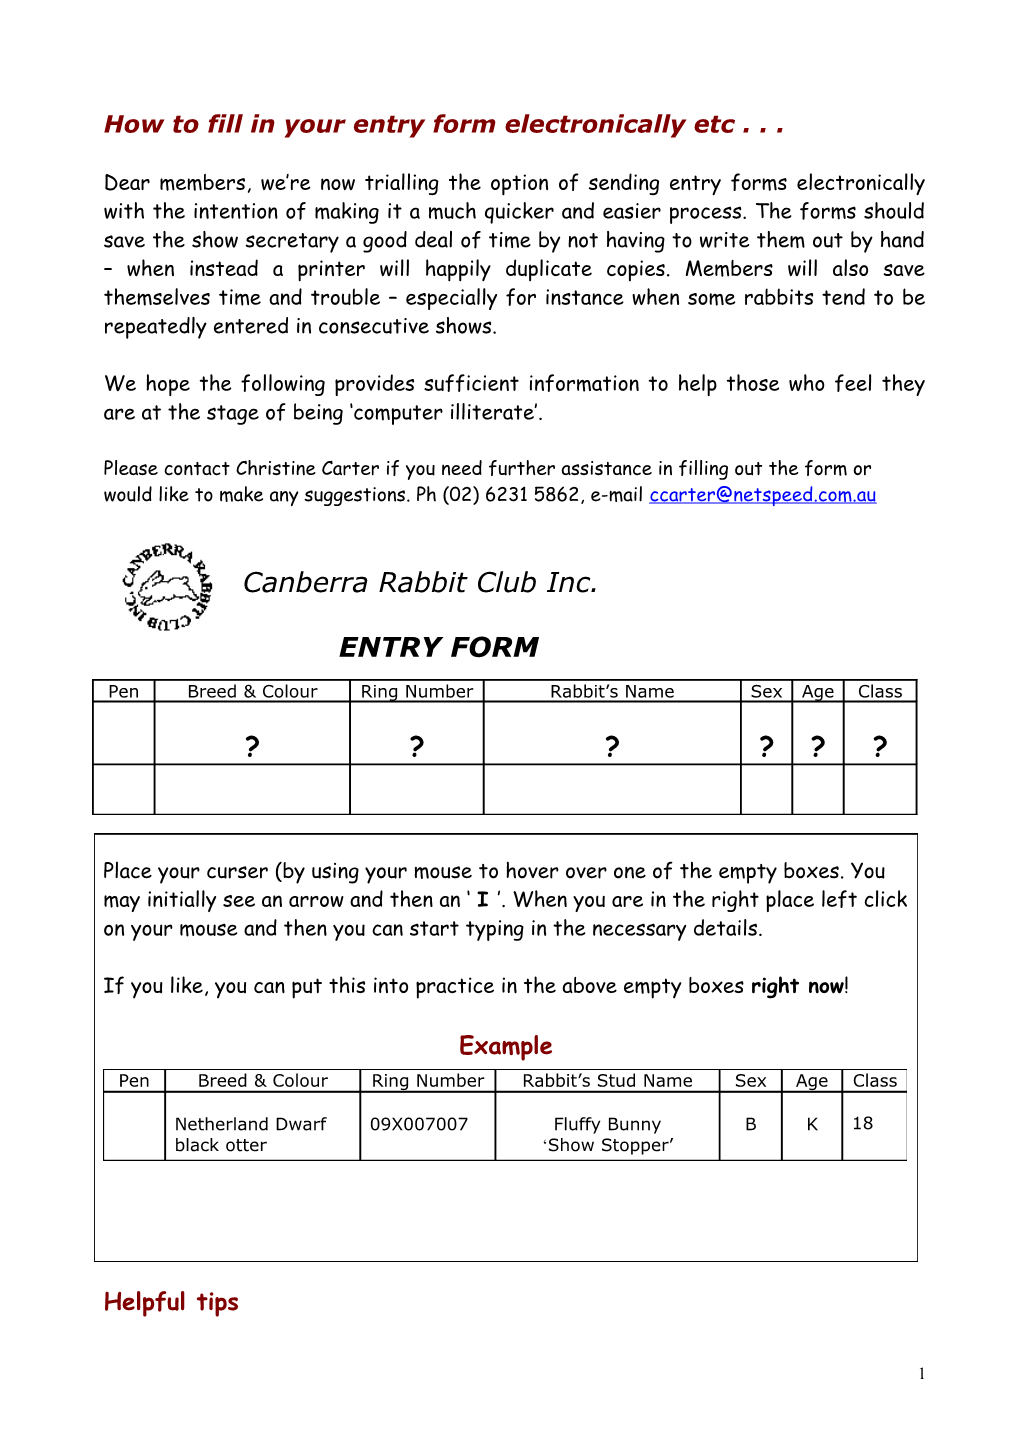 Canberra Rabbit Club Official Entry Form